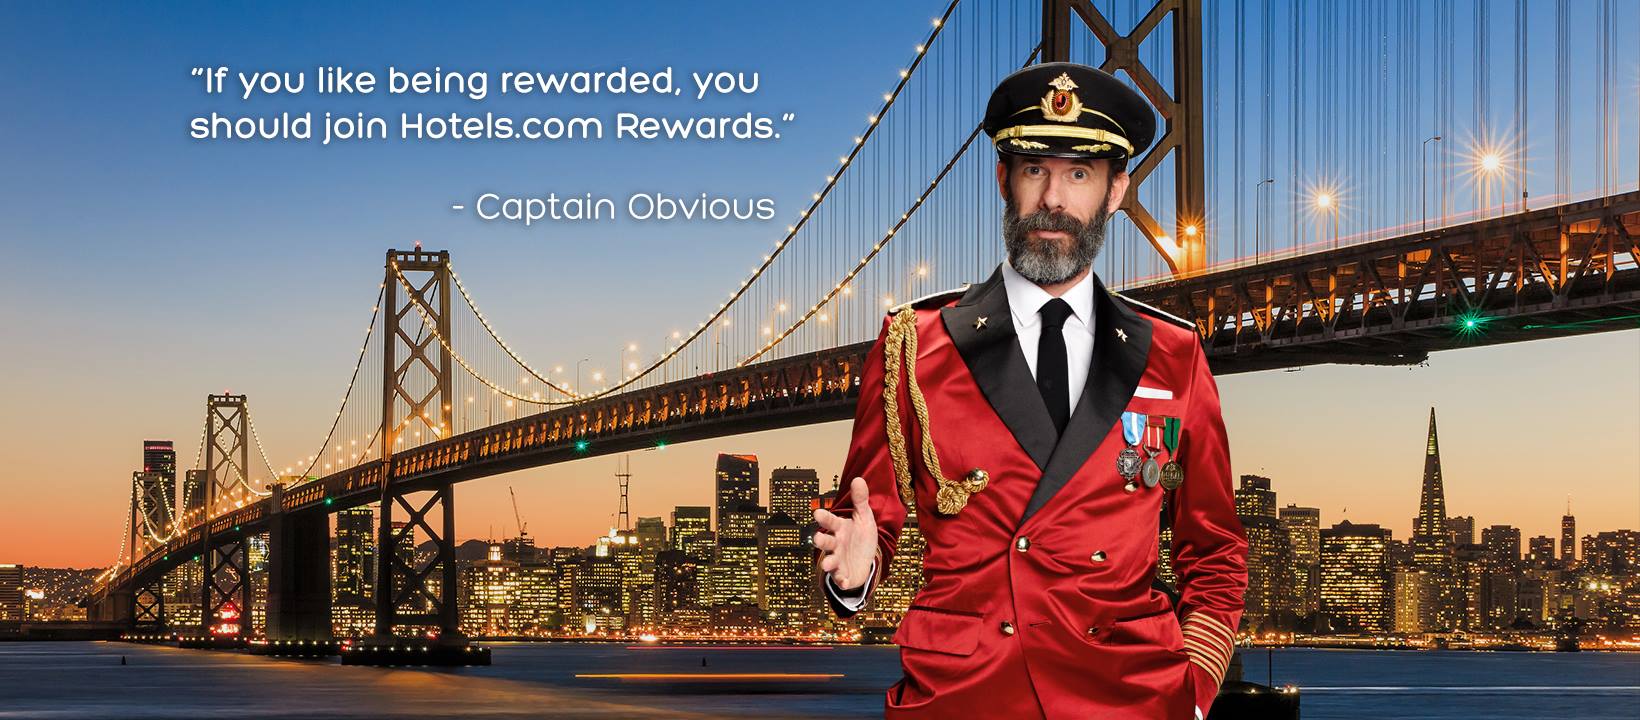 Get 1 reward night for every 10 nights you stay.